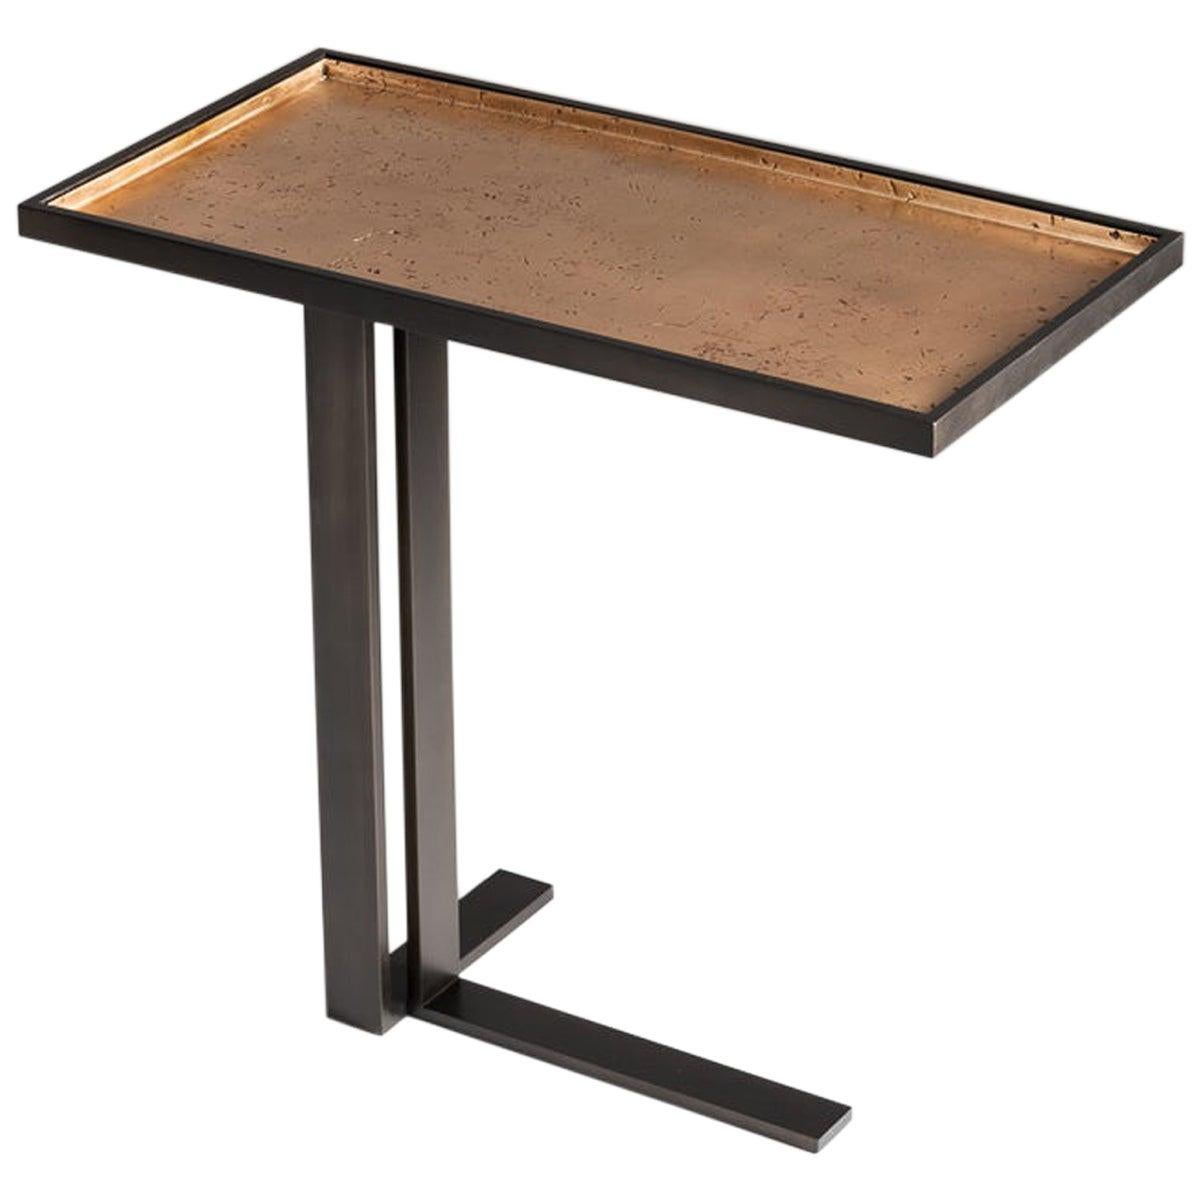 Douglas Fanning, Contemporary Bronze and Steel Drinks Table, United States, 2020